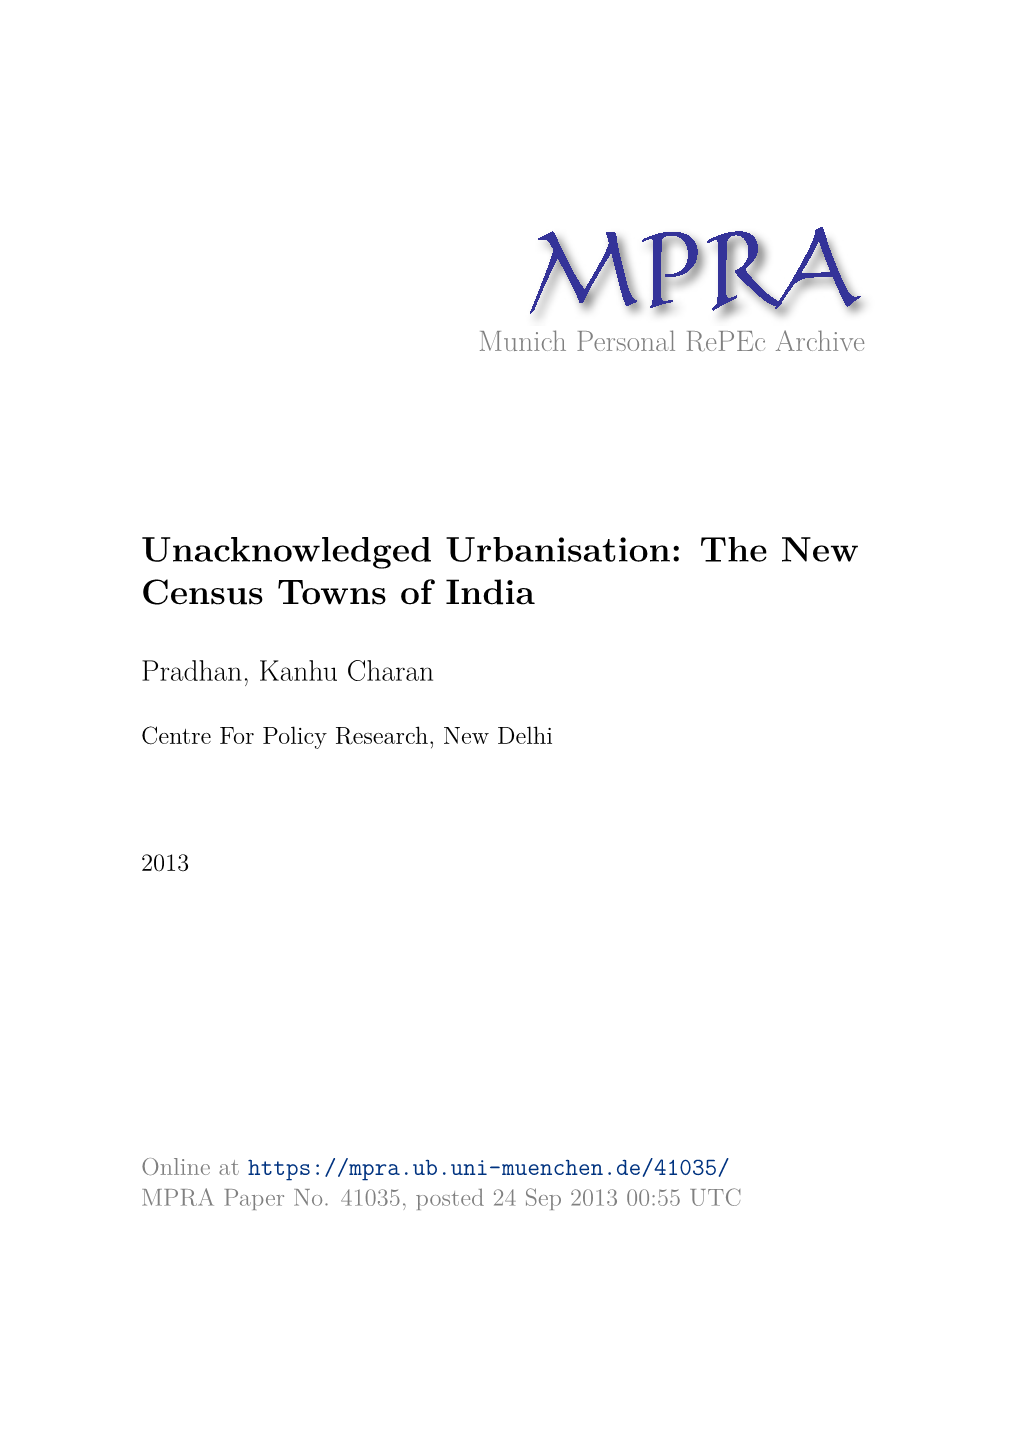 Unacknowledged Urbanisation: the New Census Towns of India